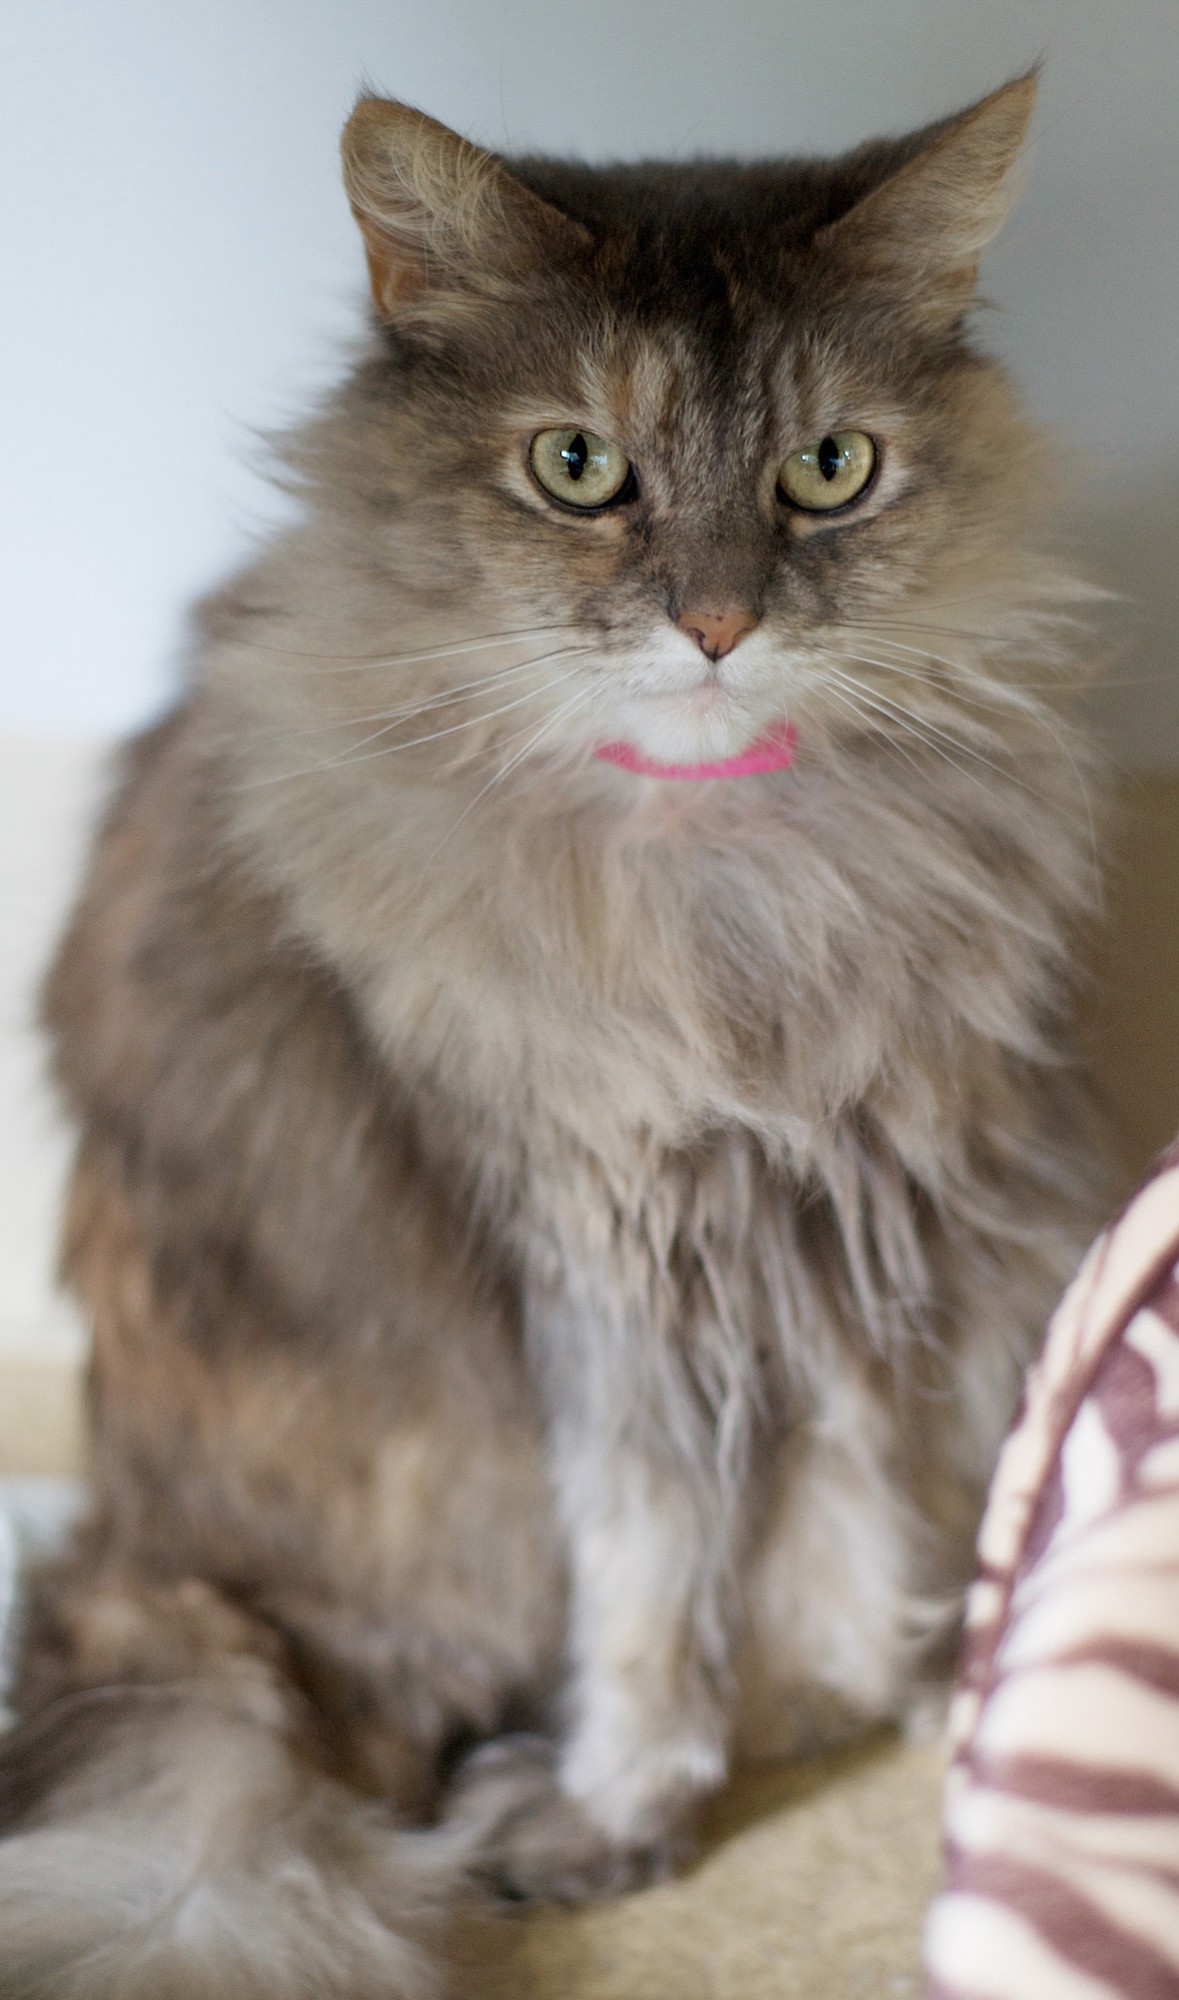 If I know you, you're looking for a beautiful cat that's a little sweet, a little sassy and with a big personality. That's me, Stardust and like my name, I can razzle-dazzle you with my charm, or dish out diva cat attitude when necessary. I'm a petite, 2-year-old, talkie girl with long gray, apricot and cream fur and huge golden eyes.